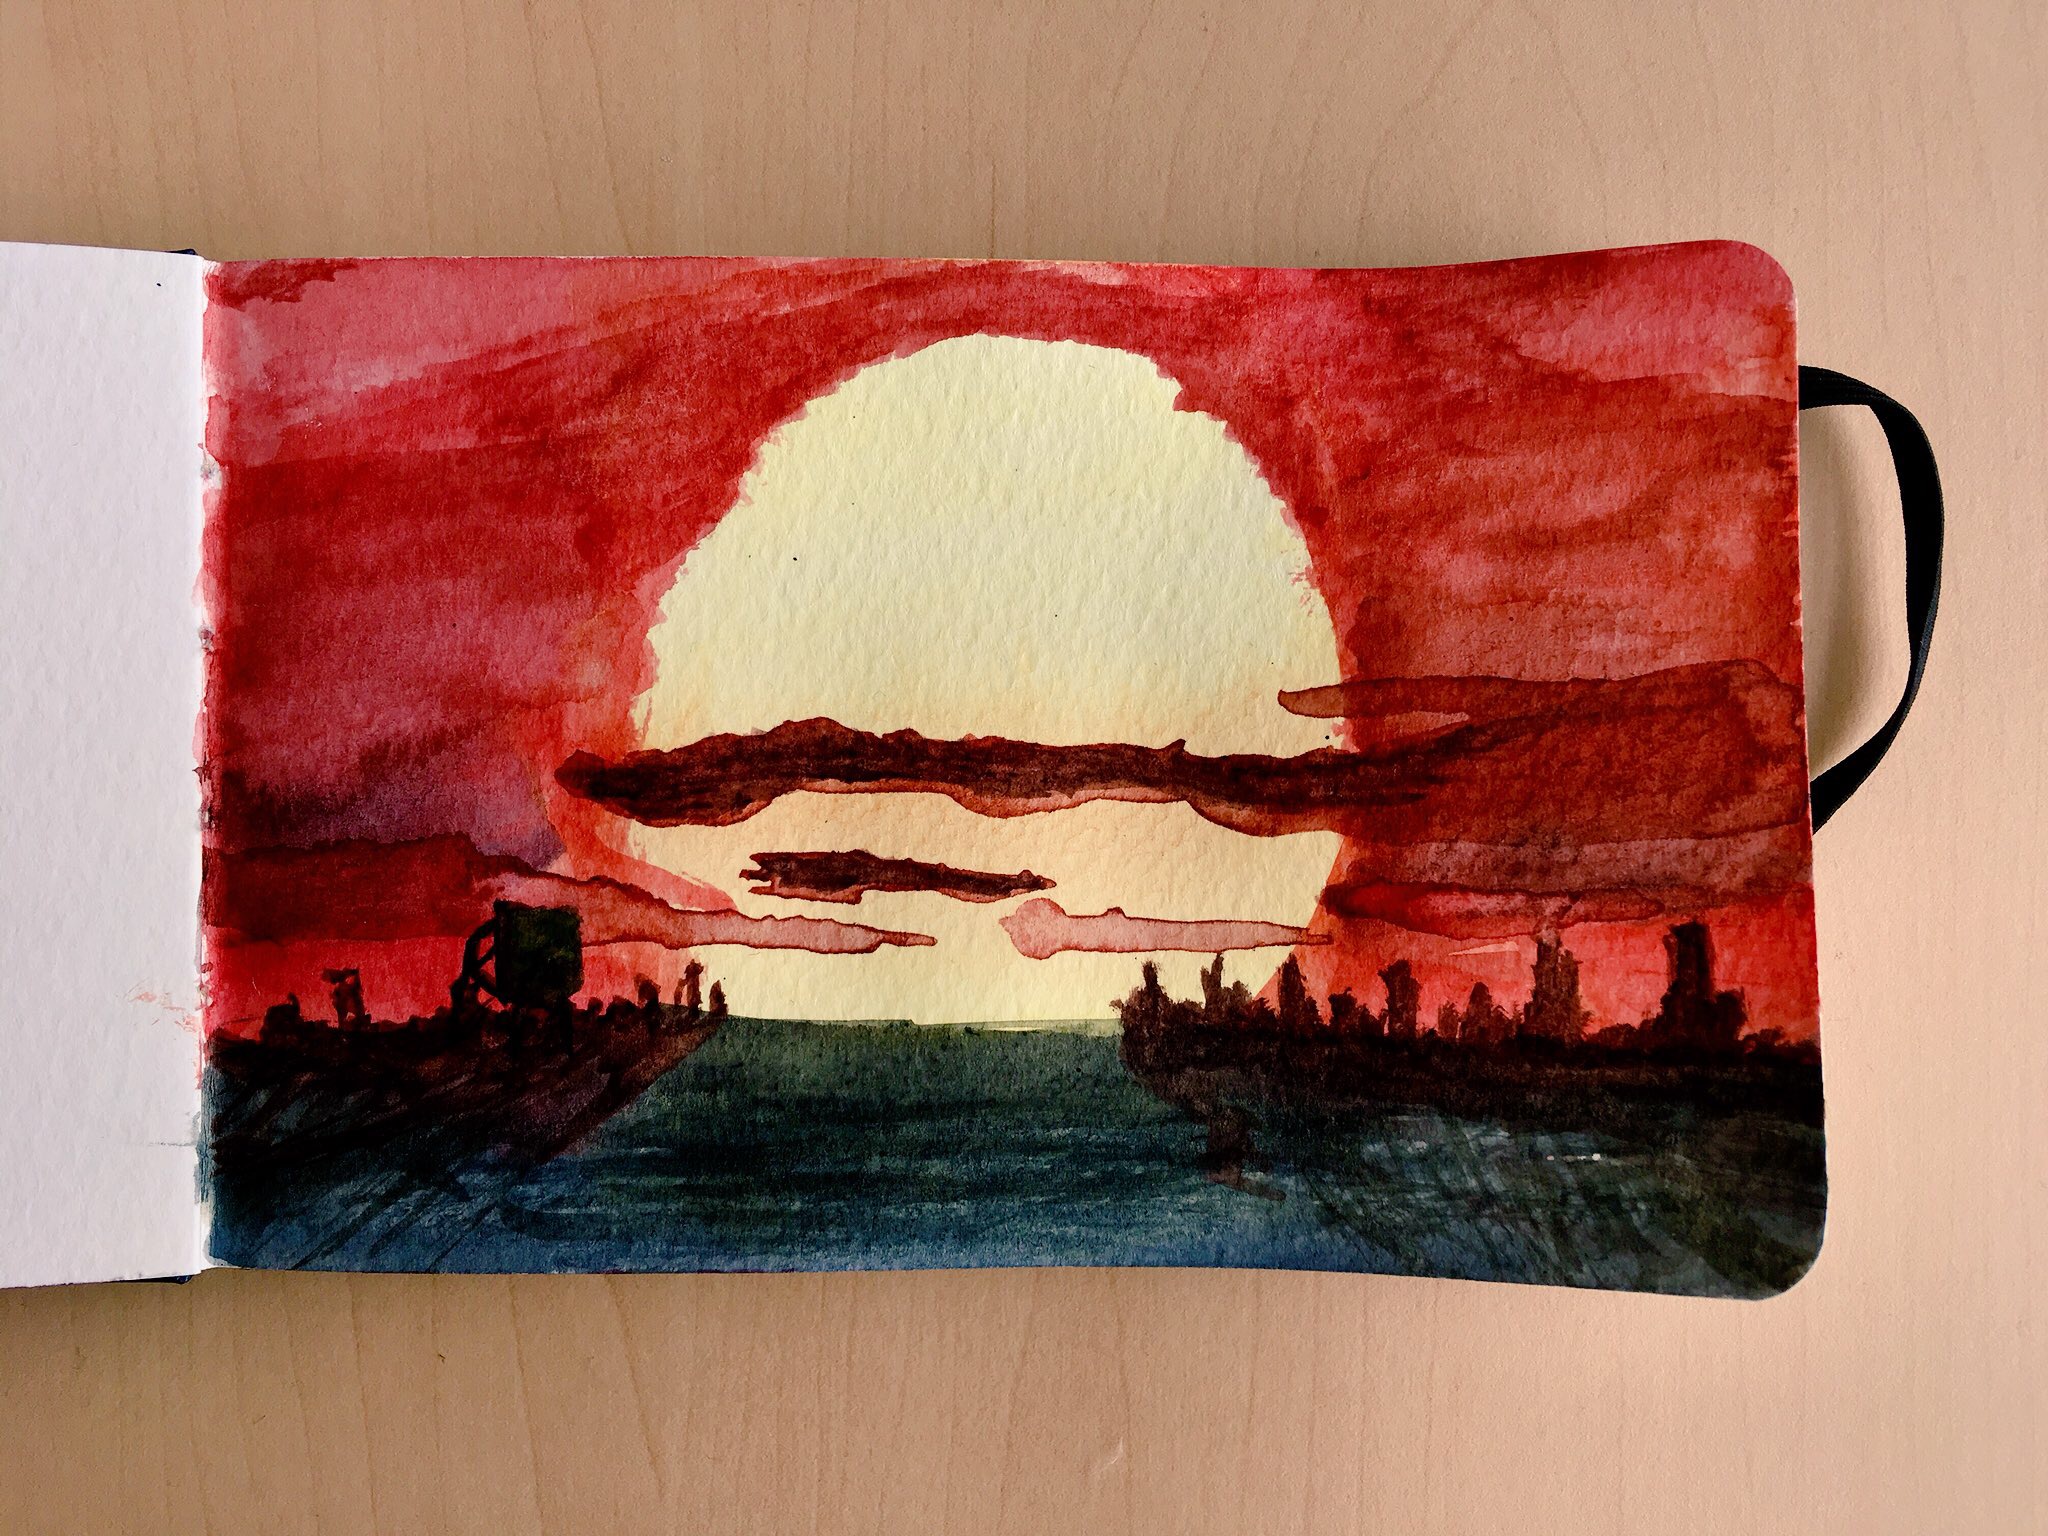 Another watercolour painting of a setting sun